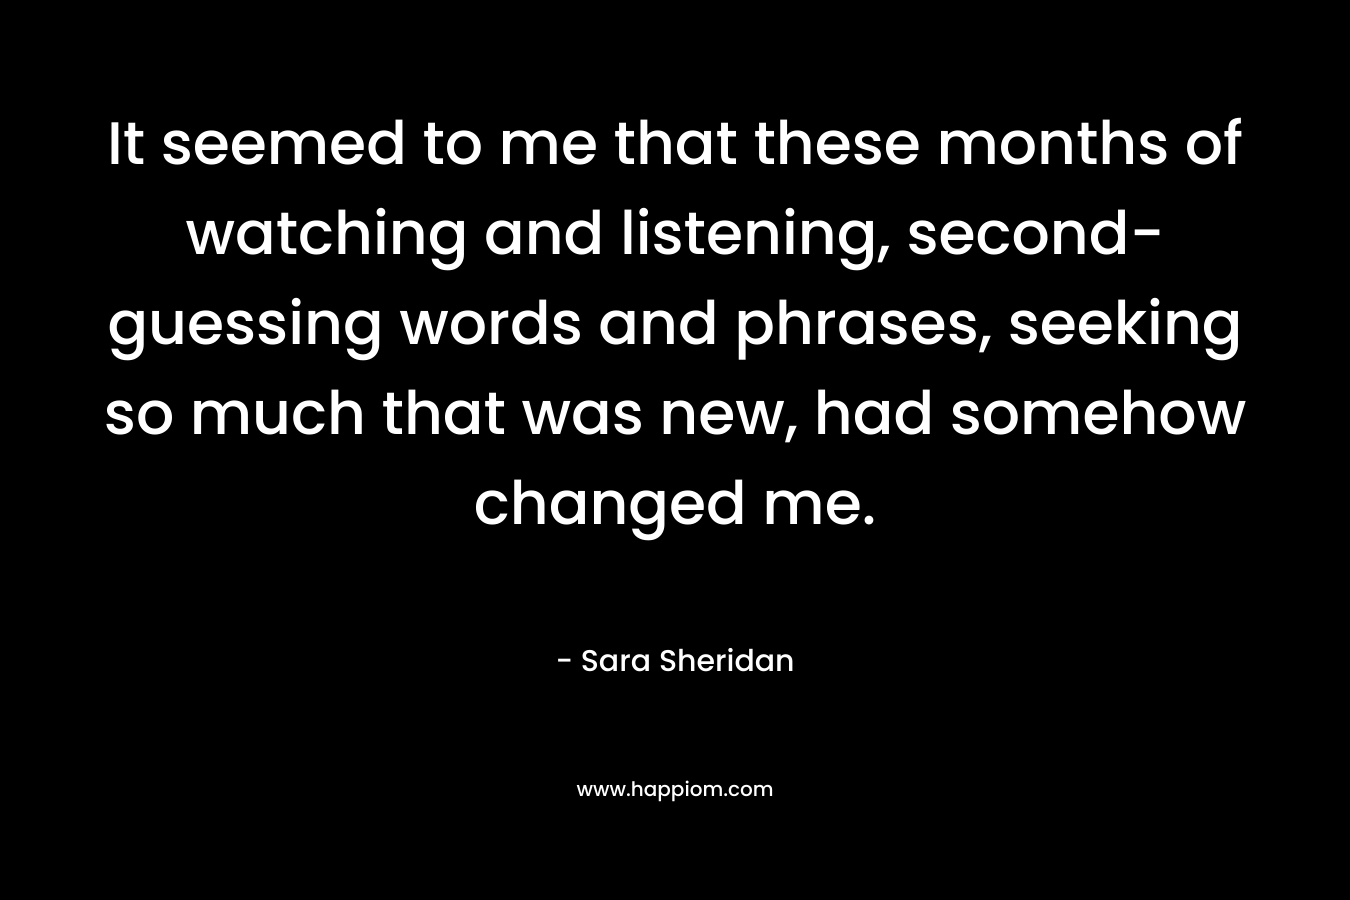 It seemed to me that these months of watching and listening, second-guessing words and phrases, seeking so much that was new, had somehow changed me. – Sara Sheridan